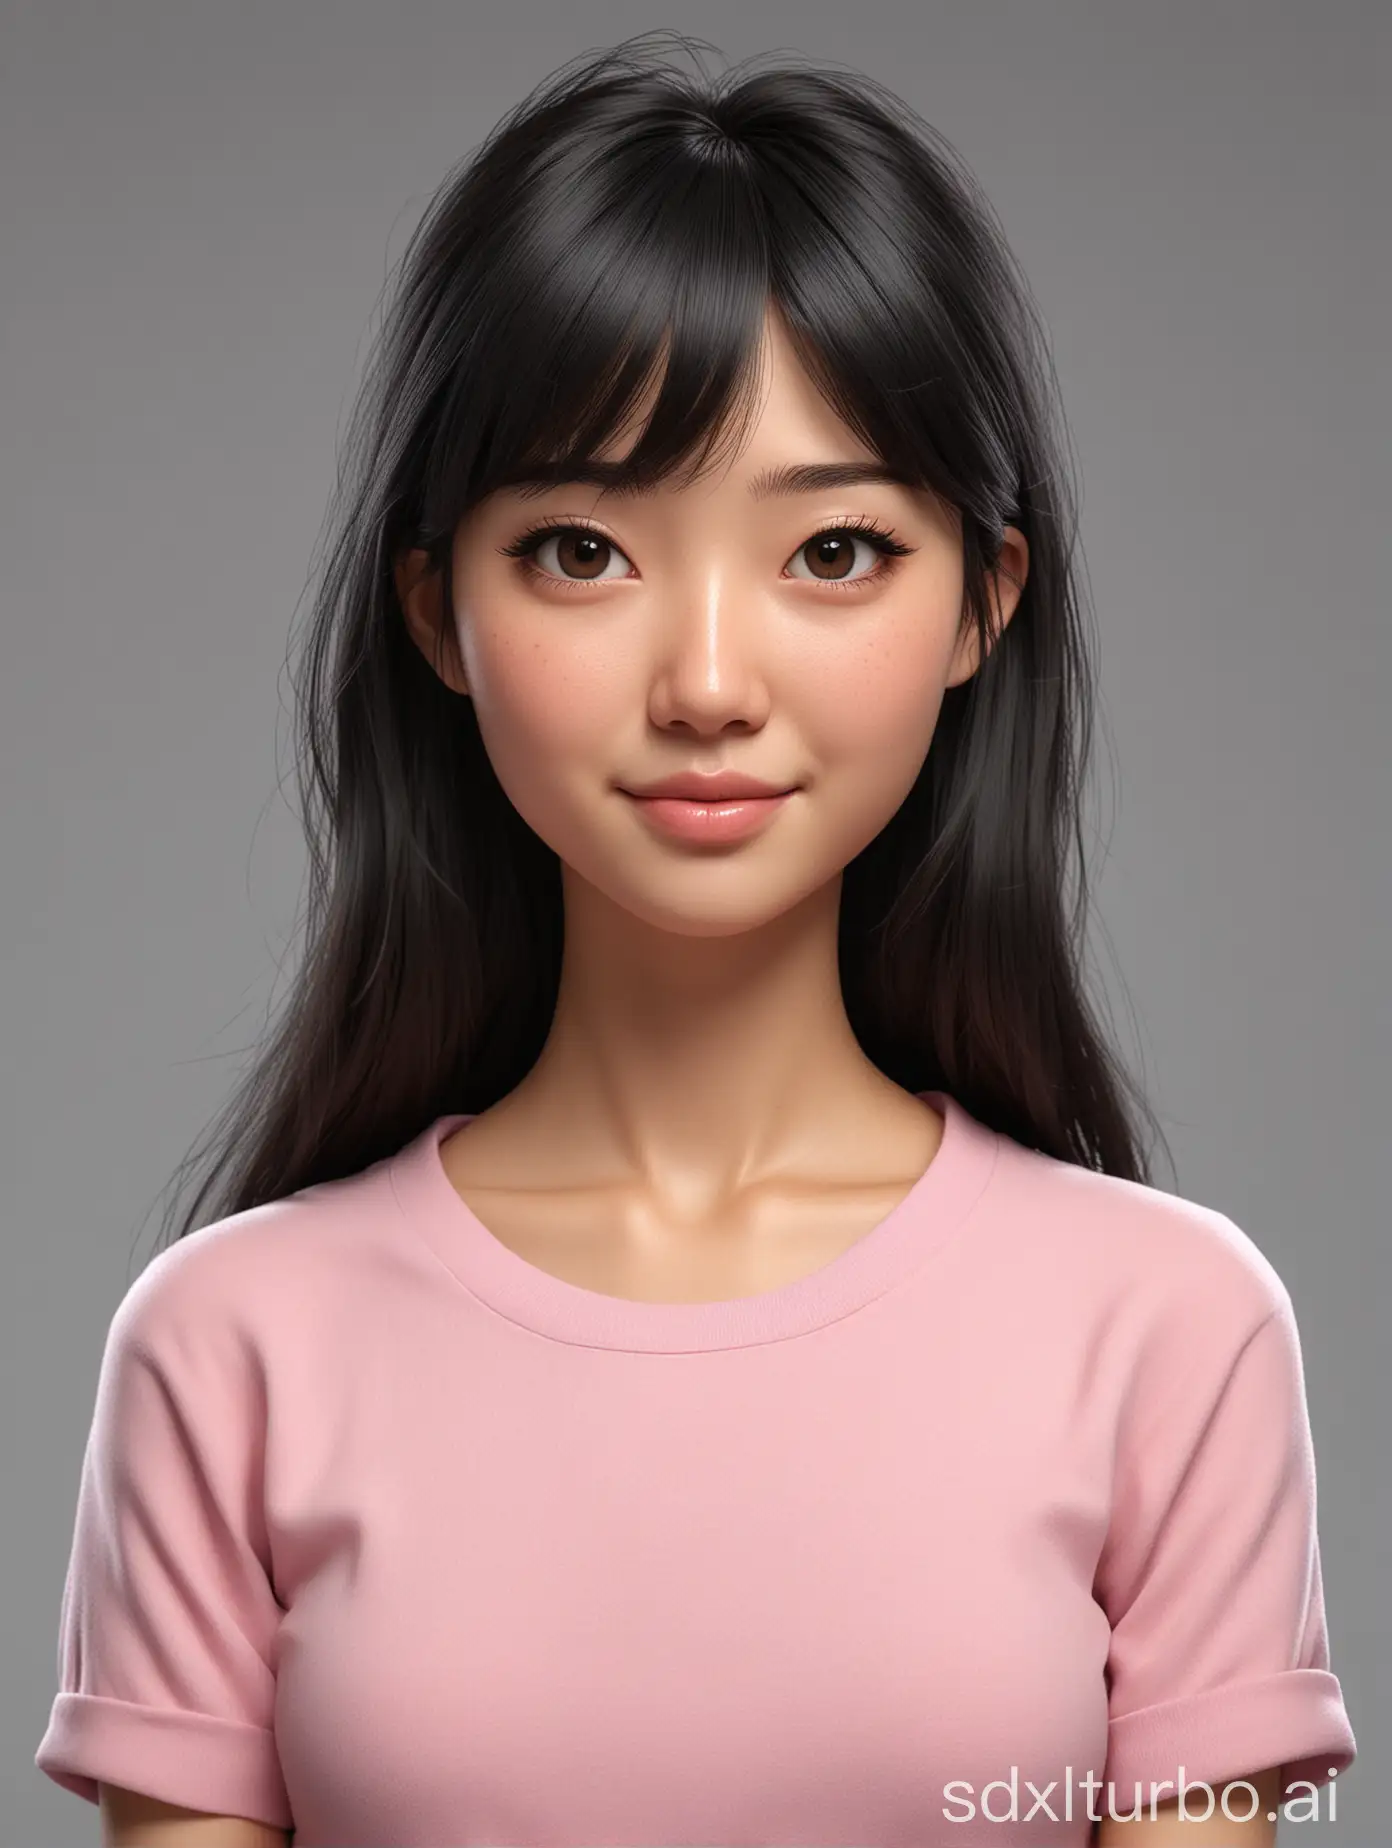 Japanese-Woman-in-Pink-Shirt-with-Crossed-Arms-Cartoon-Style-3D-Portrait